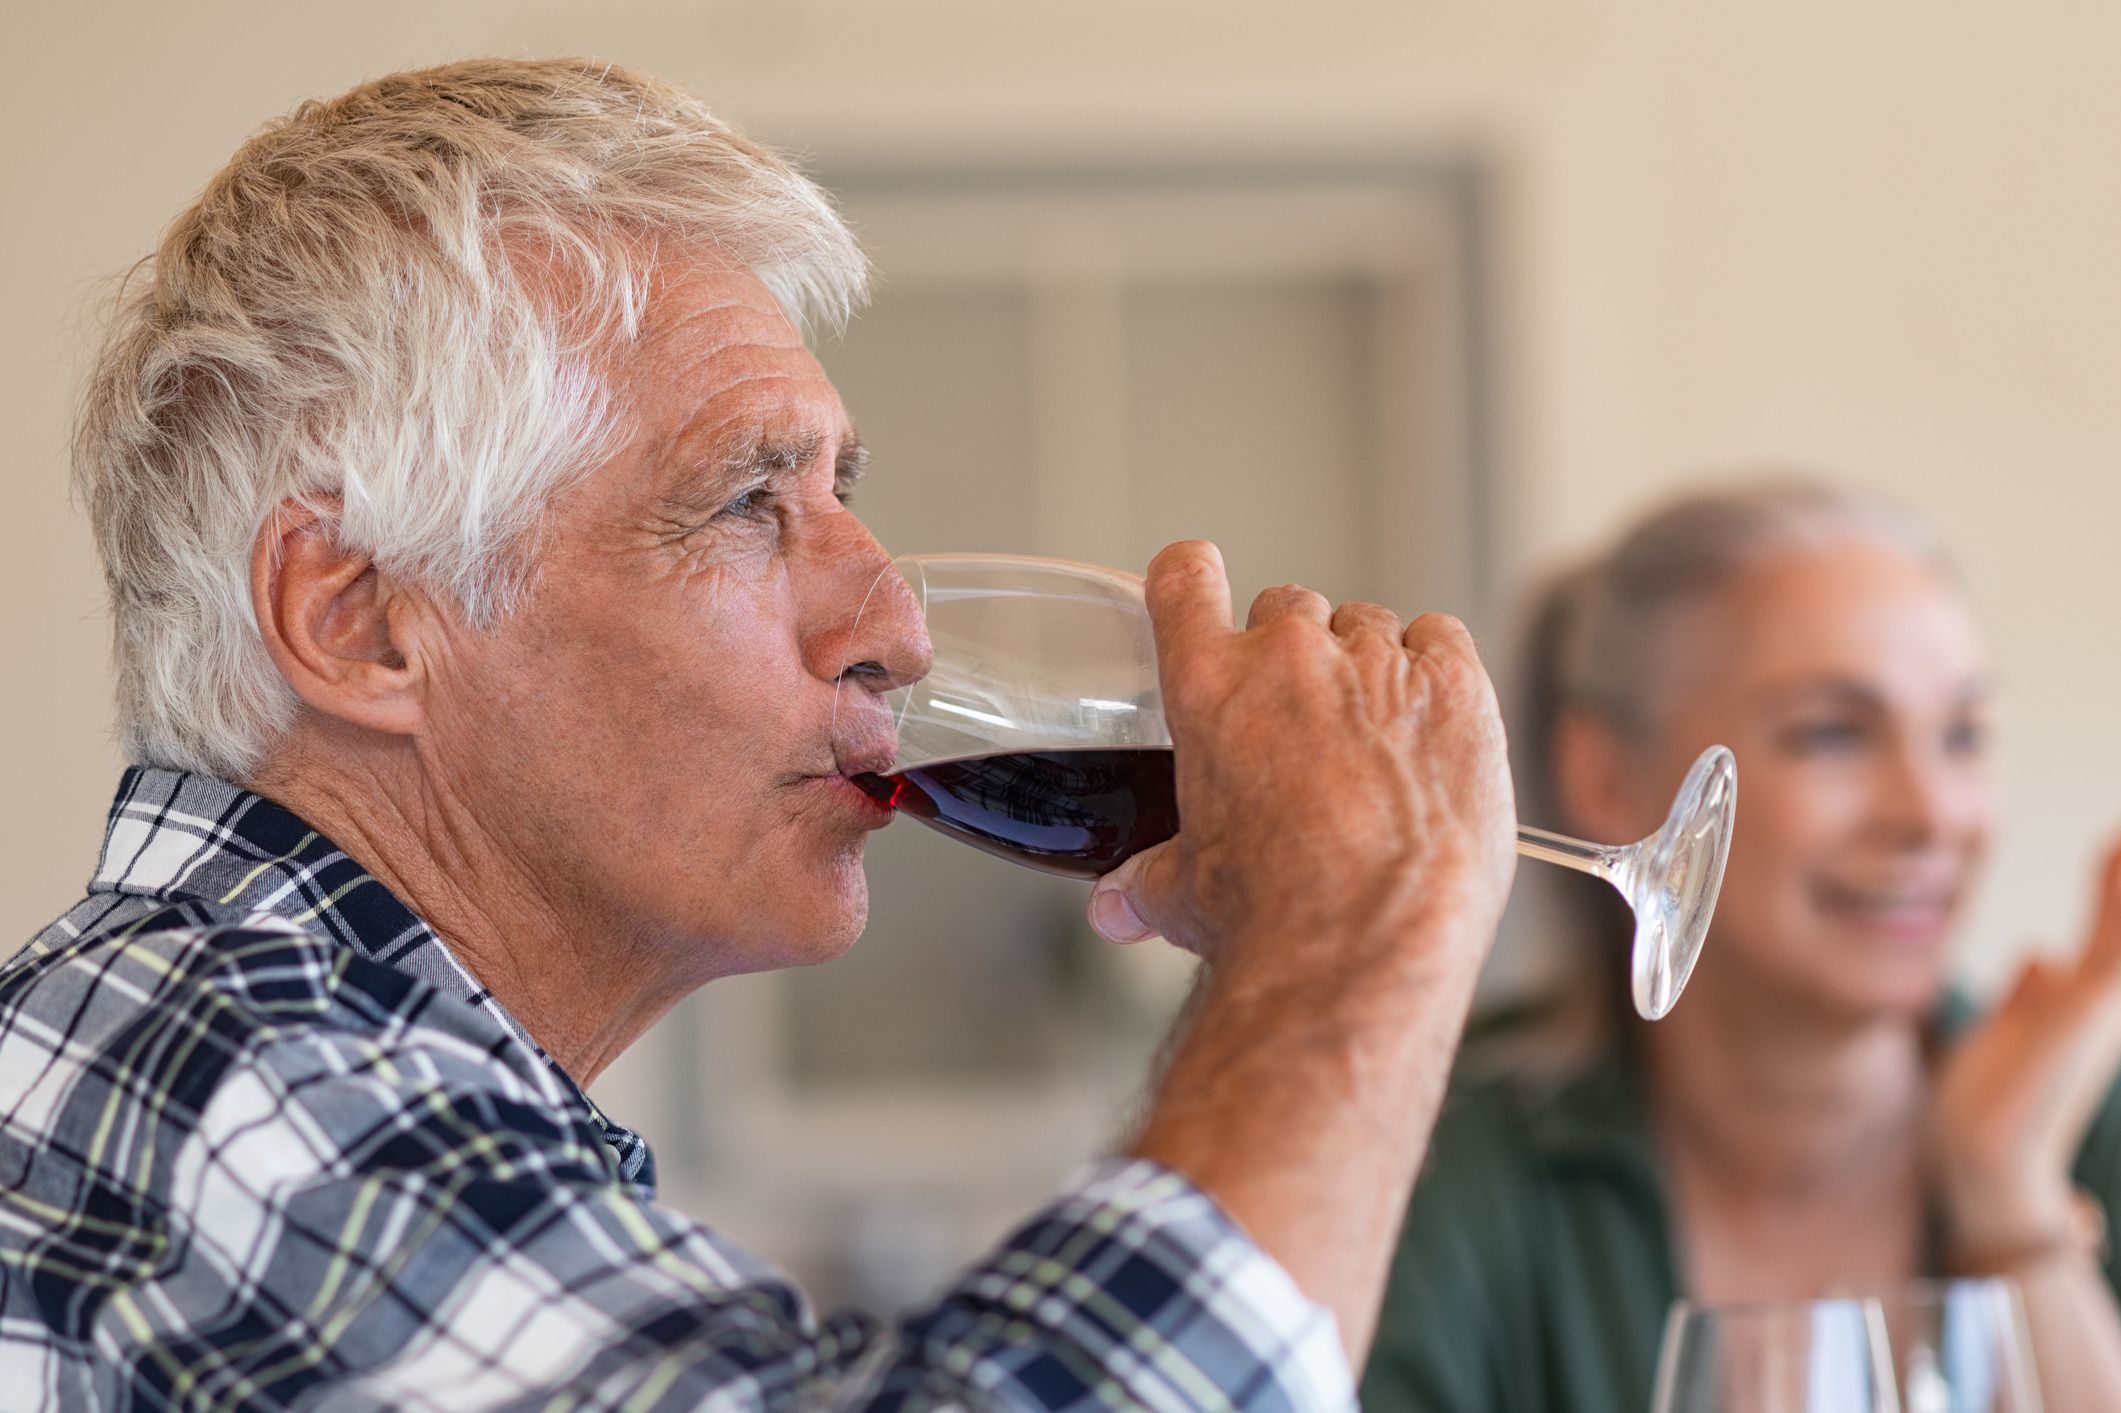 A recent study found alcohol is particularly deteremental during three stages of life.